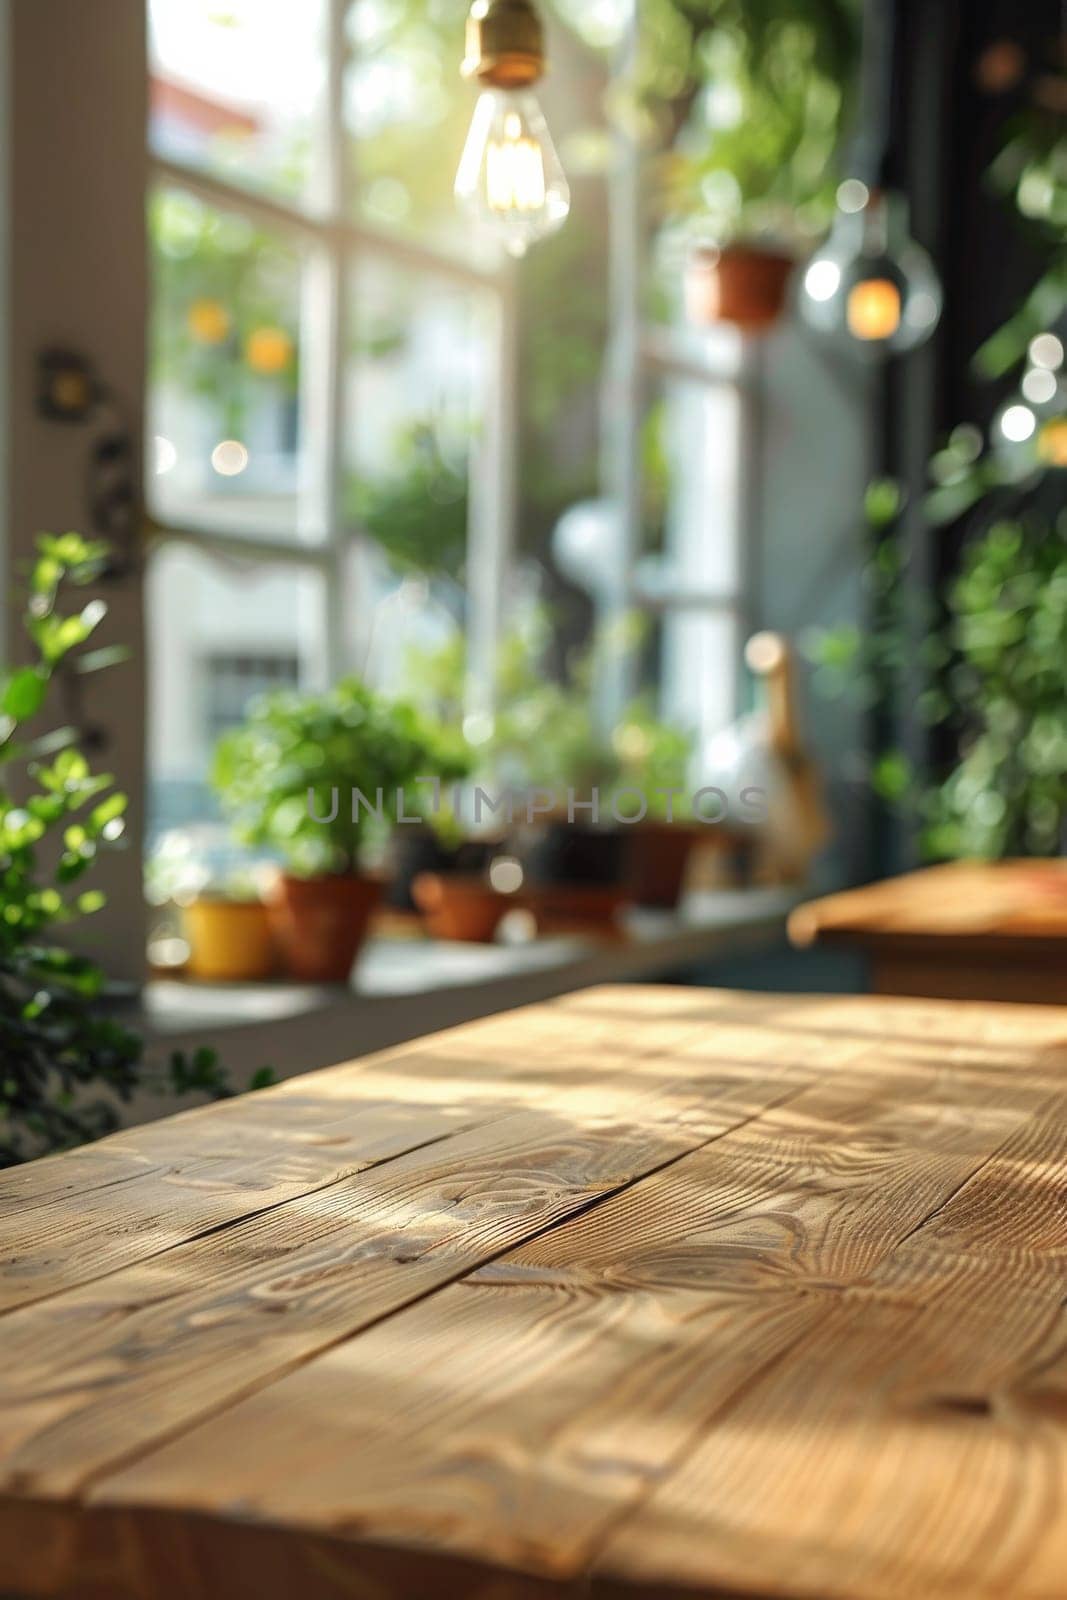 A wooden table with a view of a window and potted plants. The table is empty and the sunlight is shining on it